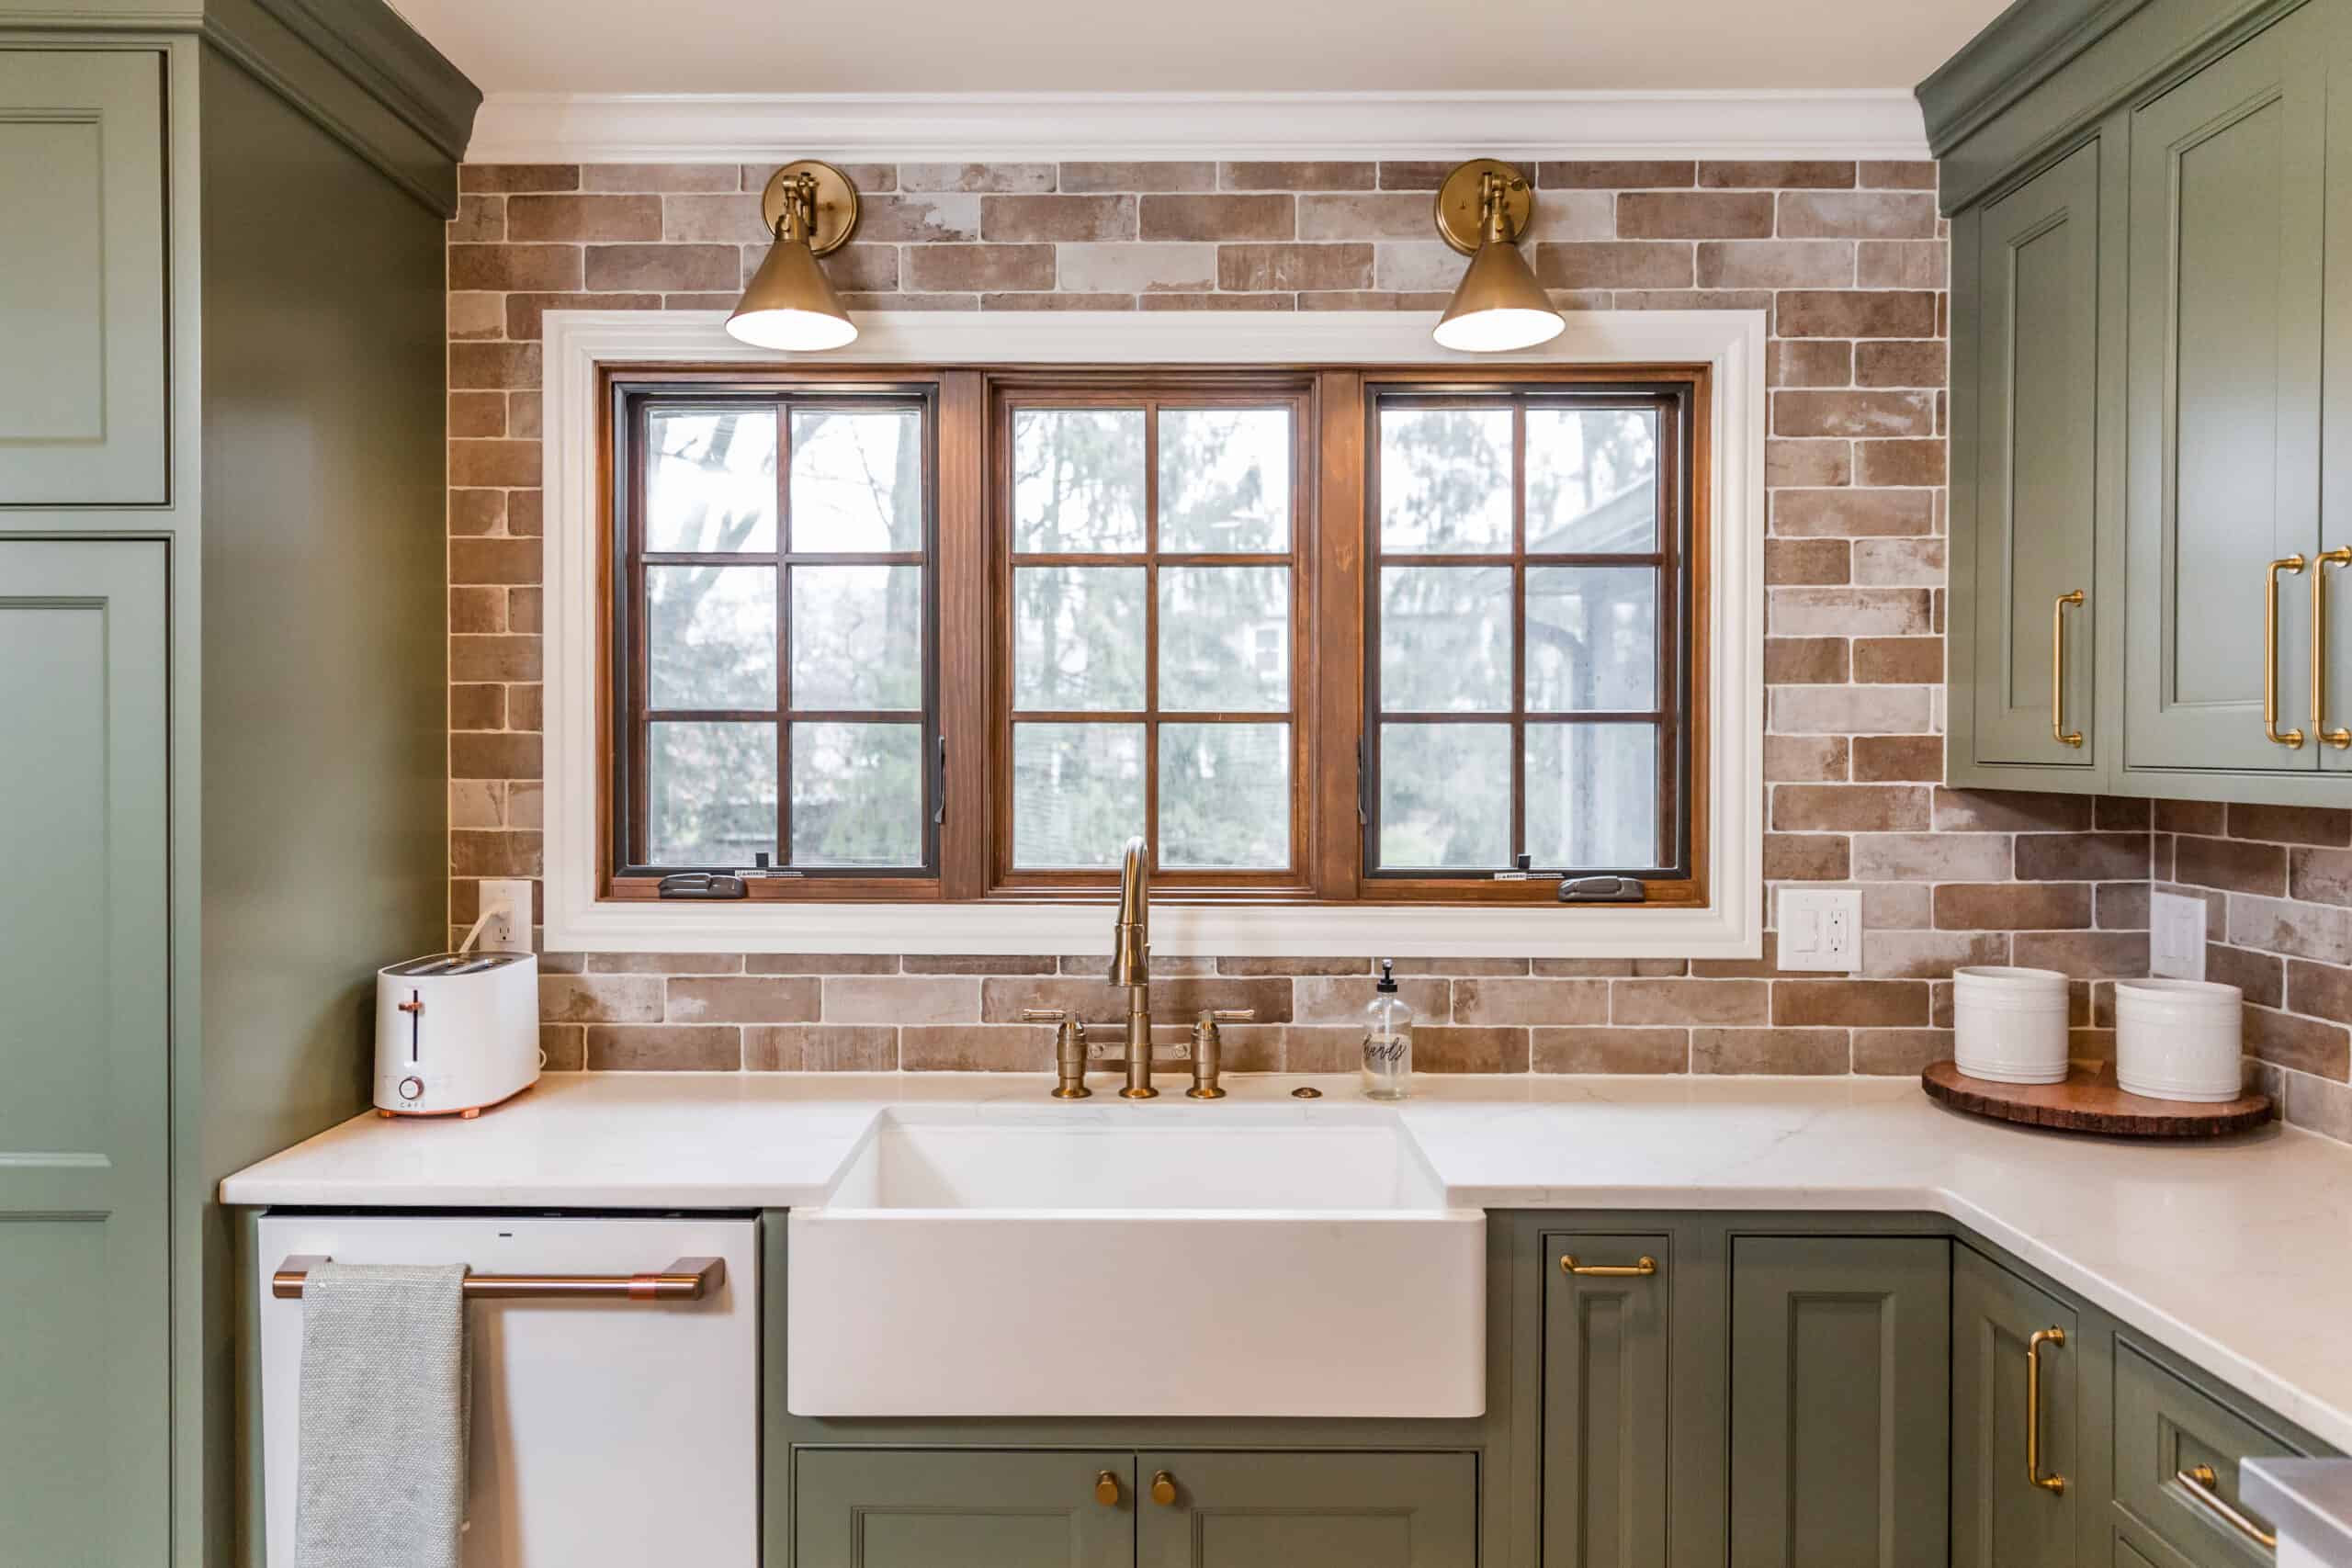 Nicholas Design Build | A modern kitchen with green cabinetry, white countertops, and a window framed by brick-patterned backsplash with two wall-mounted lights above the sink.